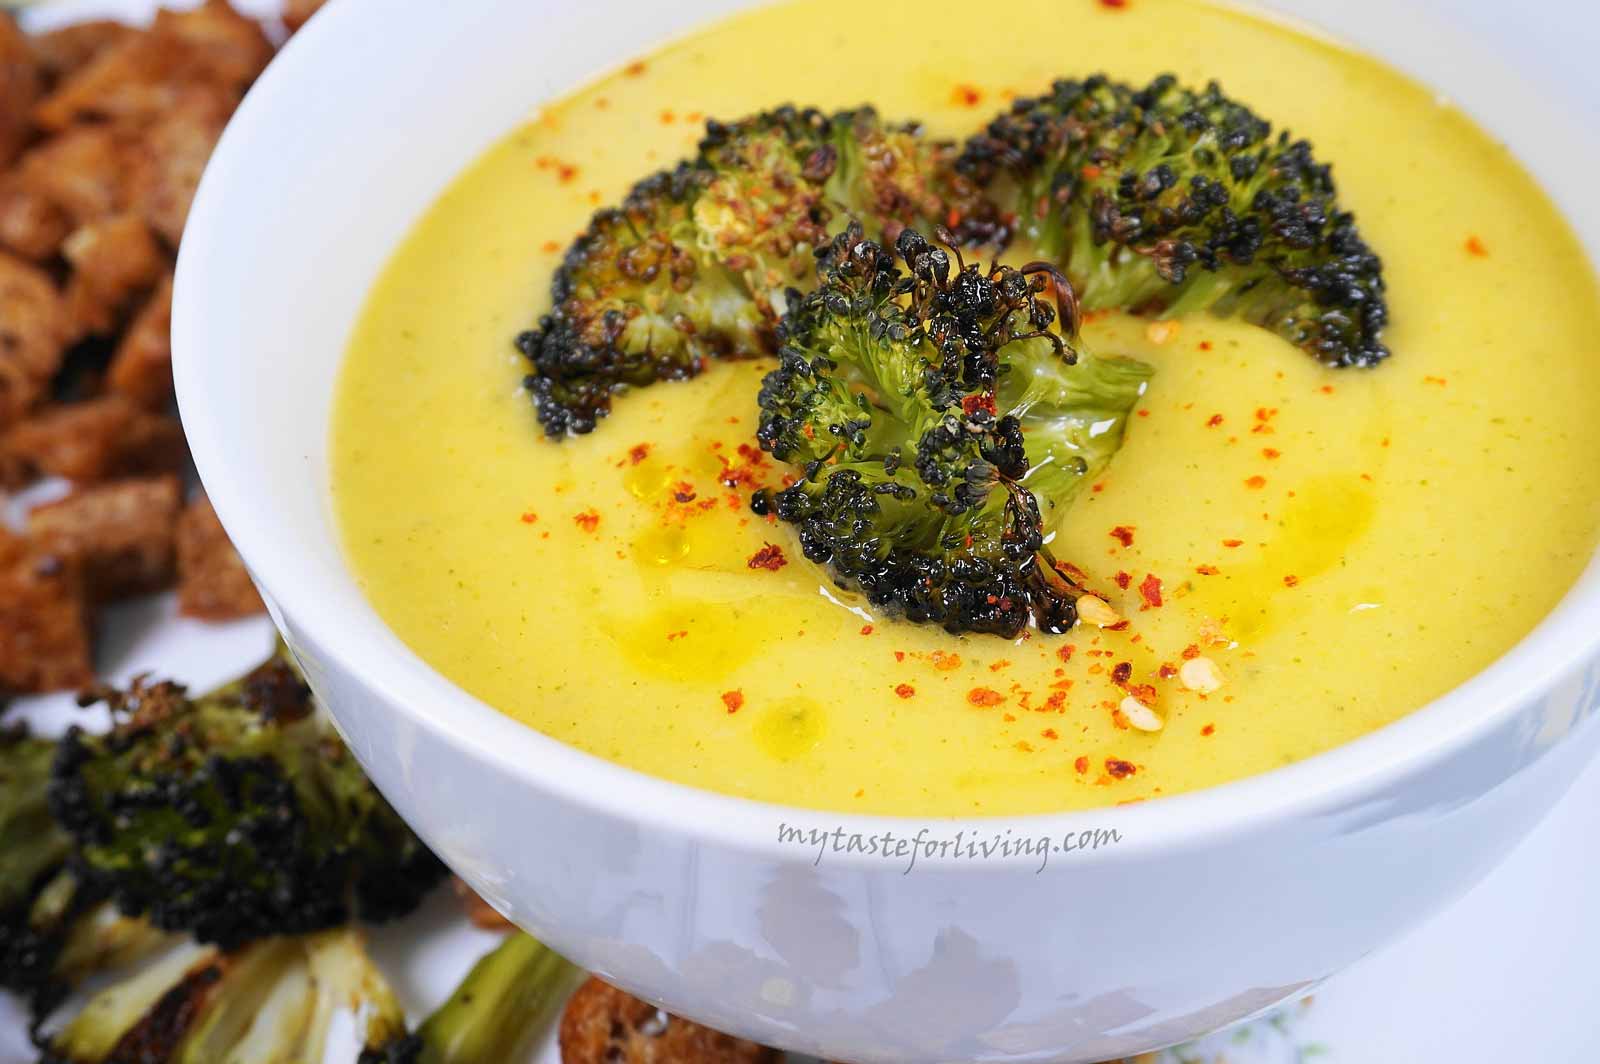 Our favourite broccoli cream soup is extremely easy to make and can be prepared in a vegan version (or suitable for fasting) or you can add butter and season it with 1-2 tablespoons of Parmesan cheese. I also offer you two options for what to cook with the rest of the broccoli you have left.